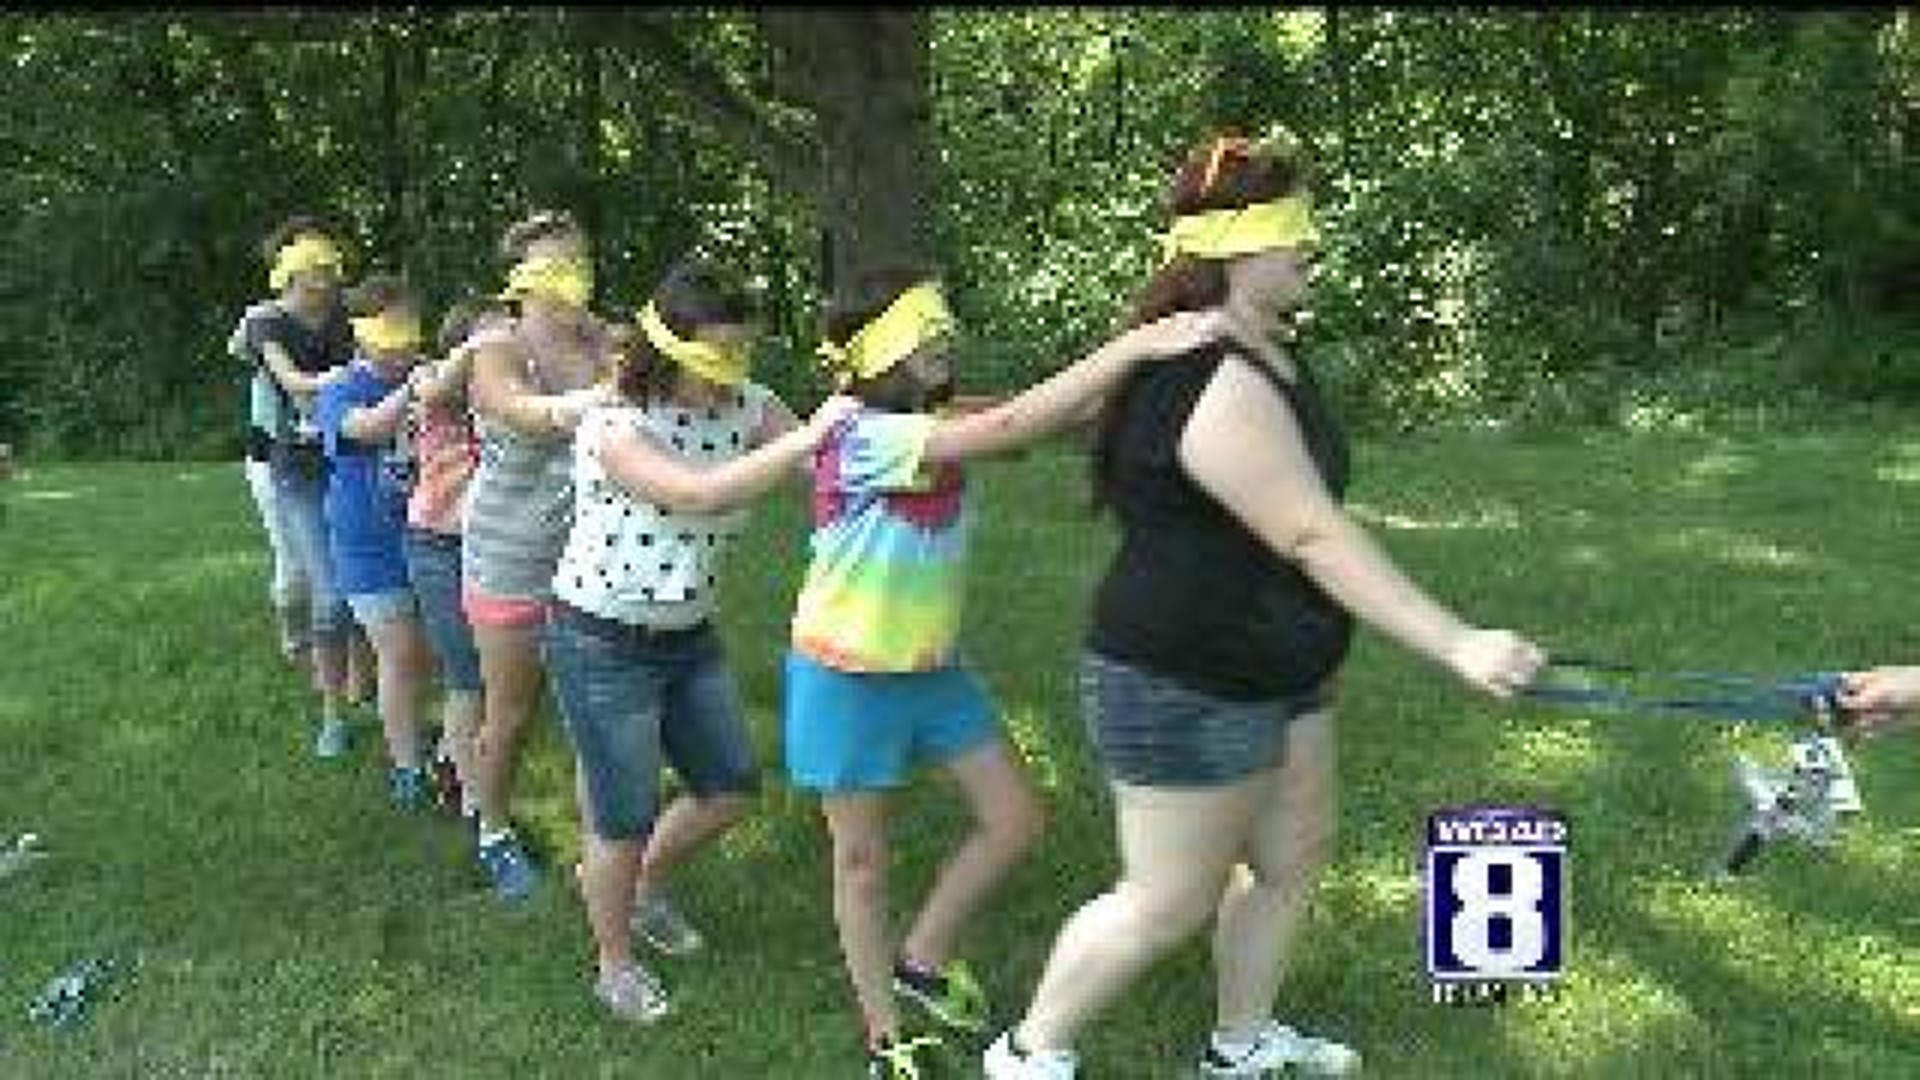 Free camp to kids who have family members battling cancer